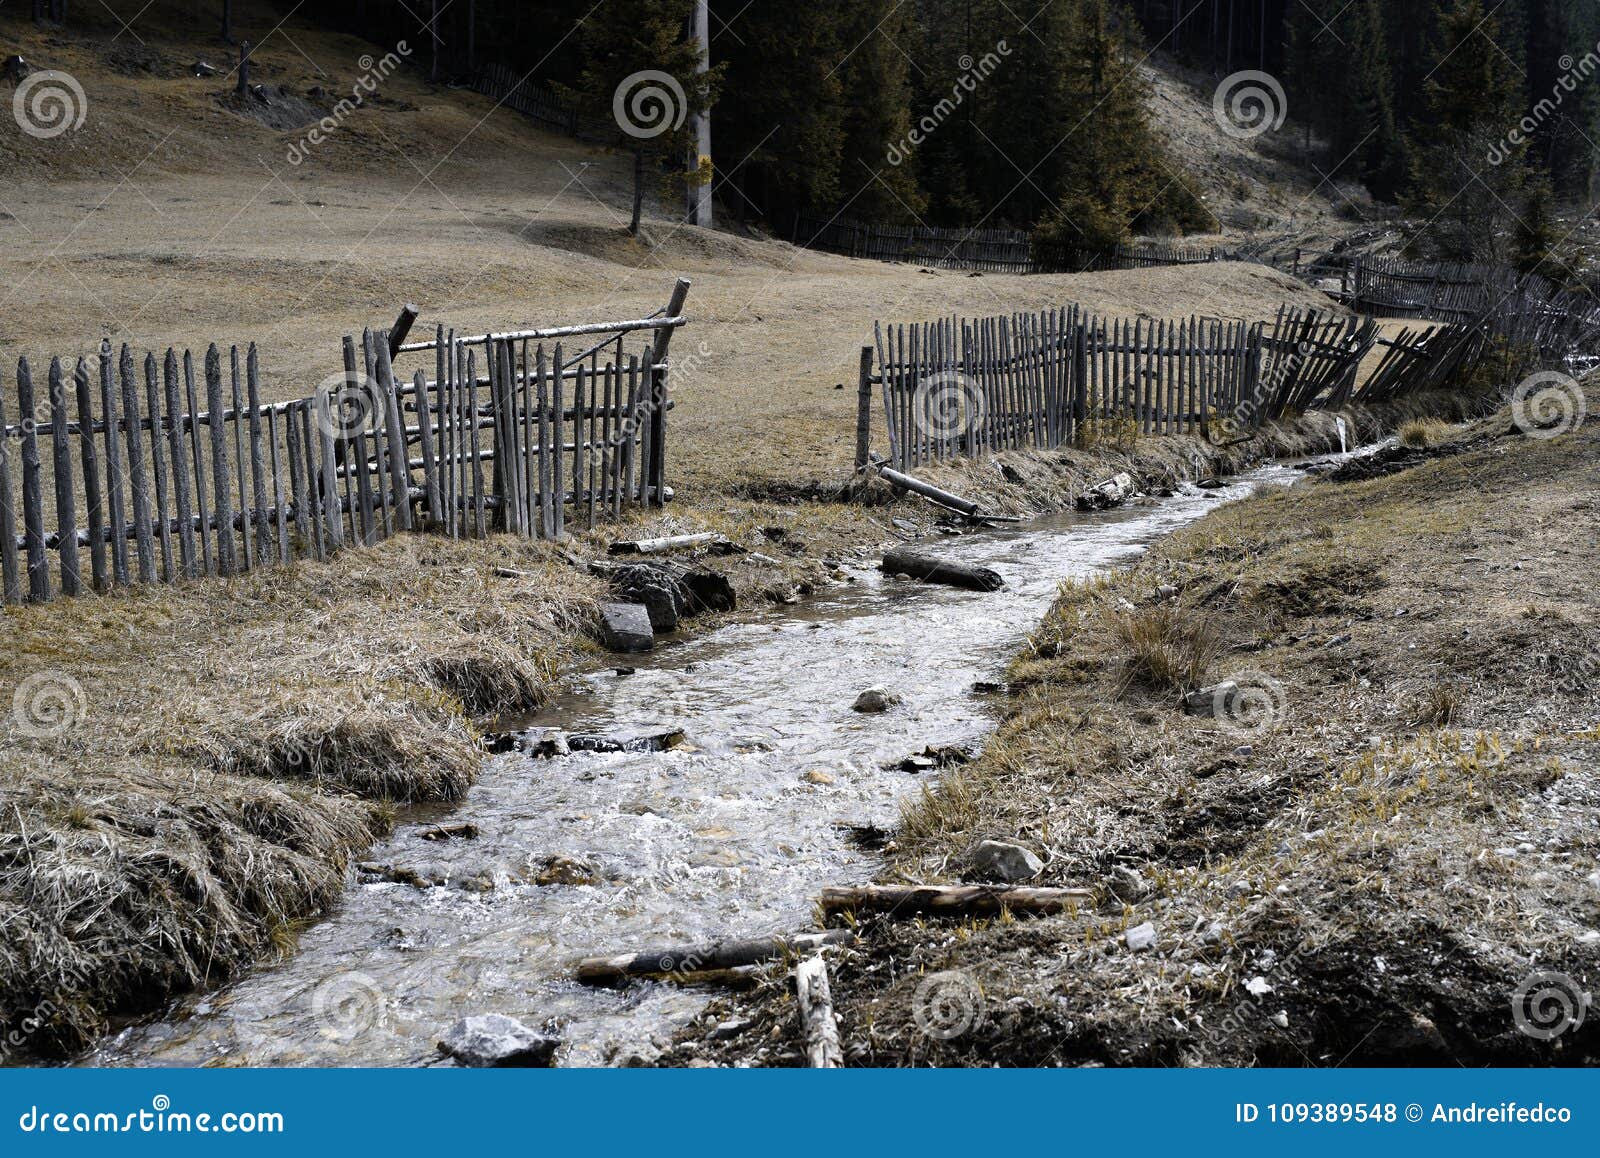 115 Small Country Stream Fence Stock Photos